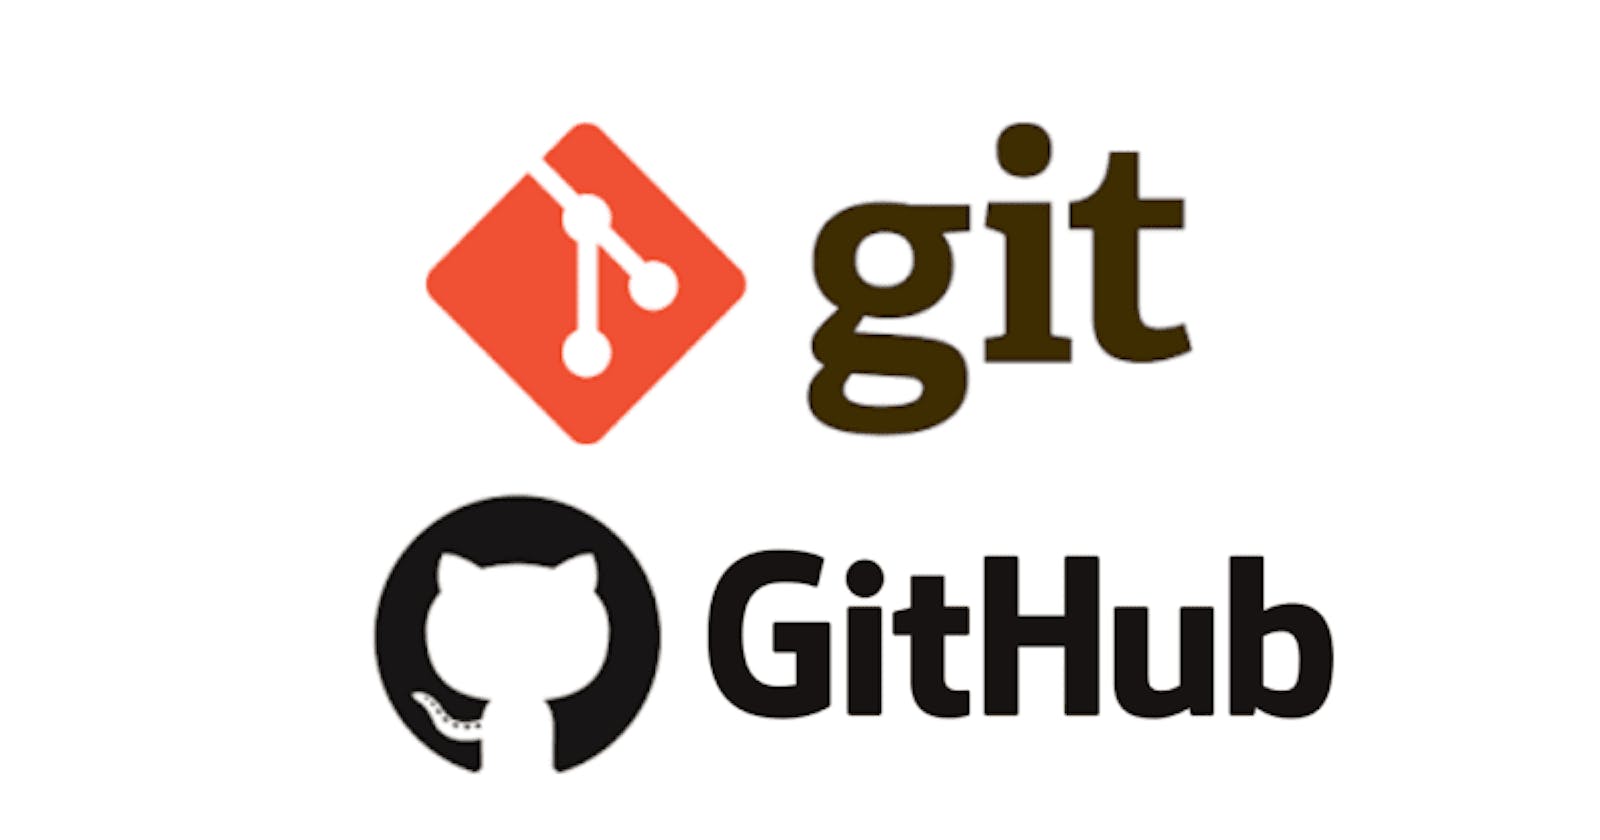 Enough Git and GitHub that every programmer should know.